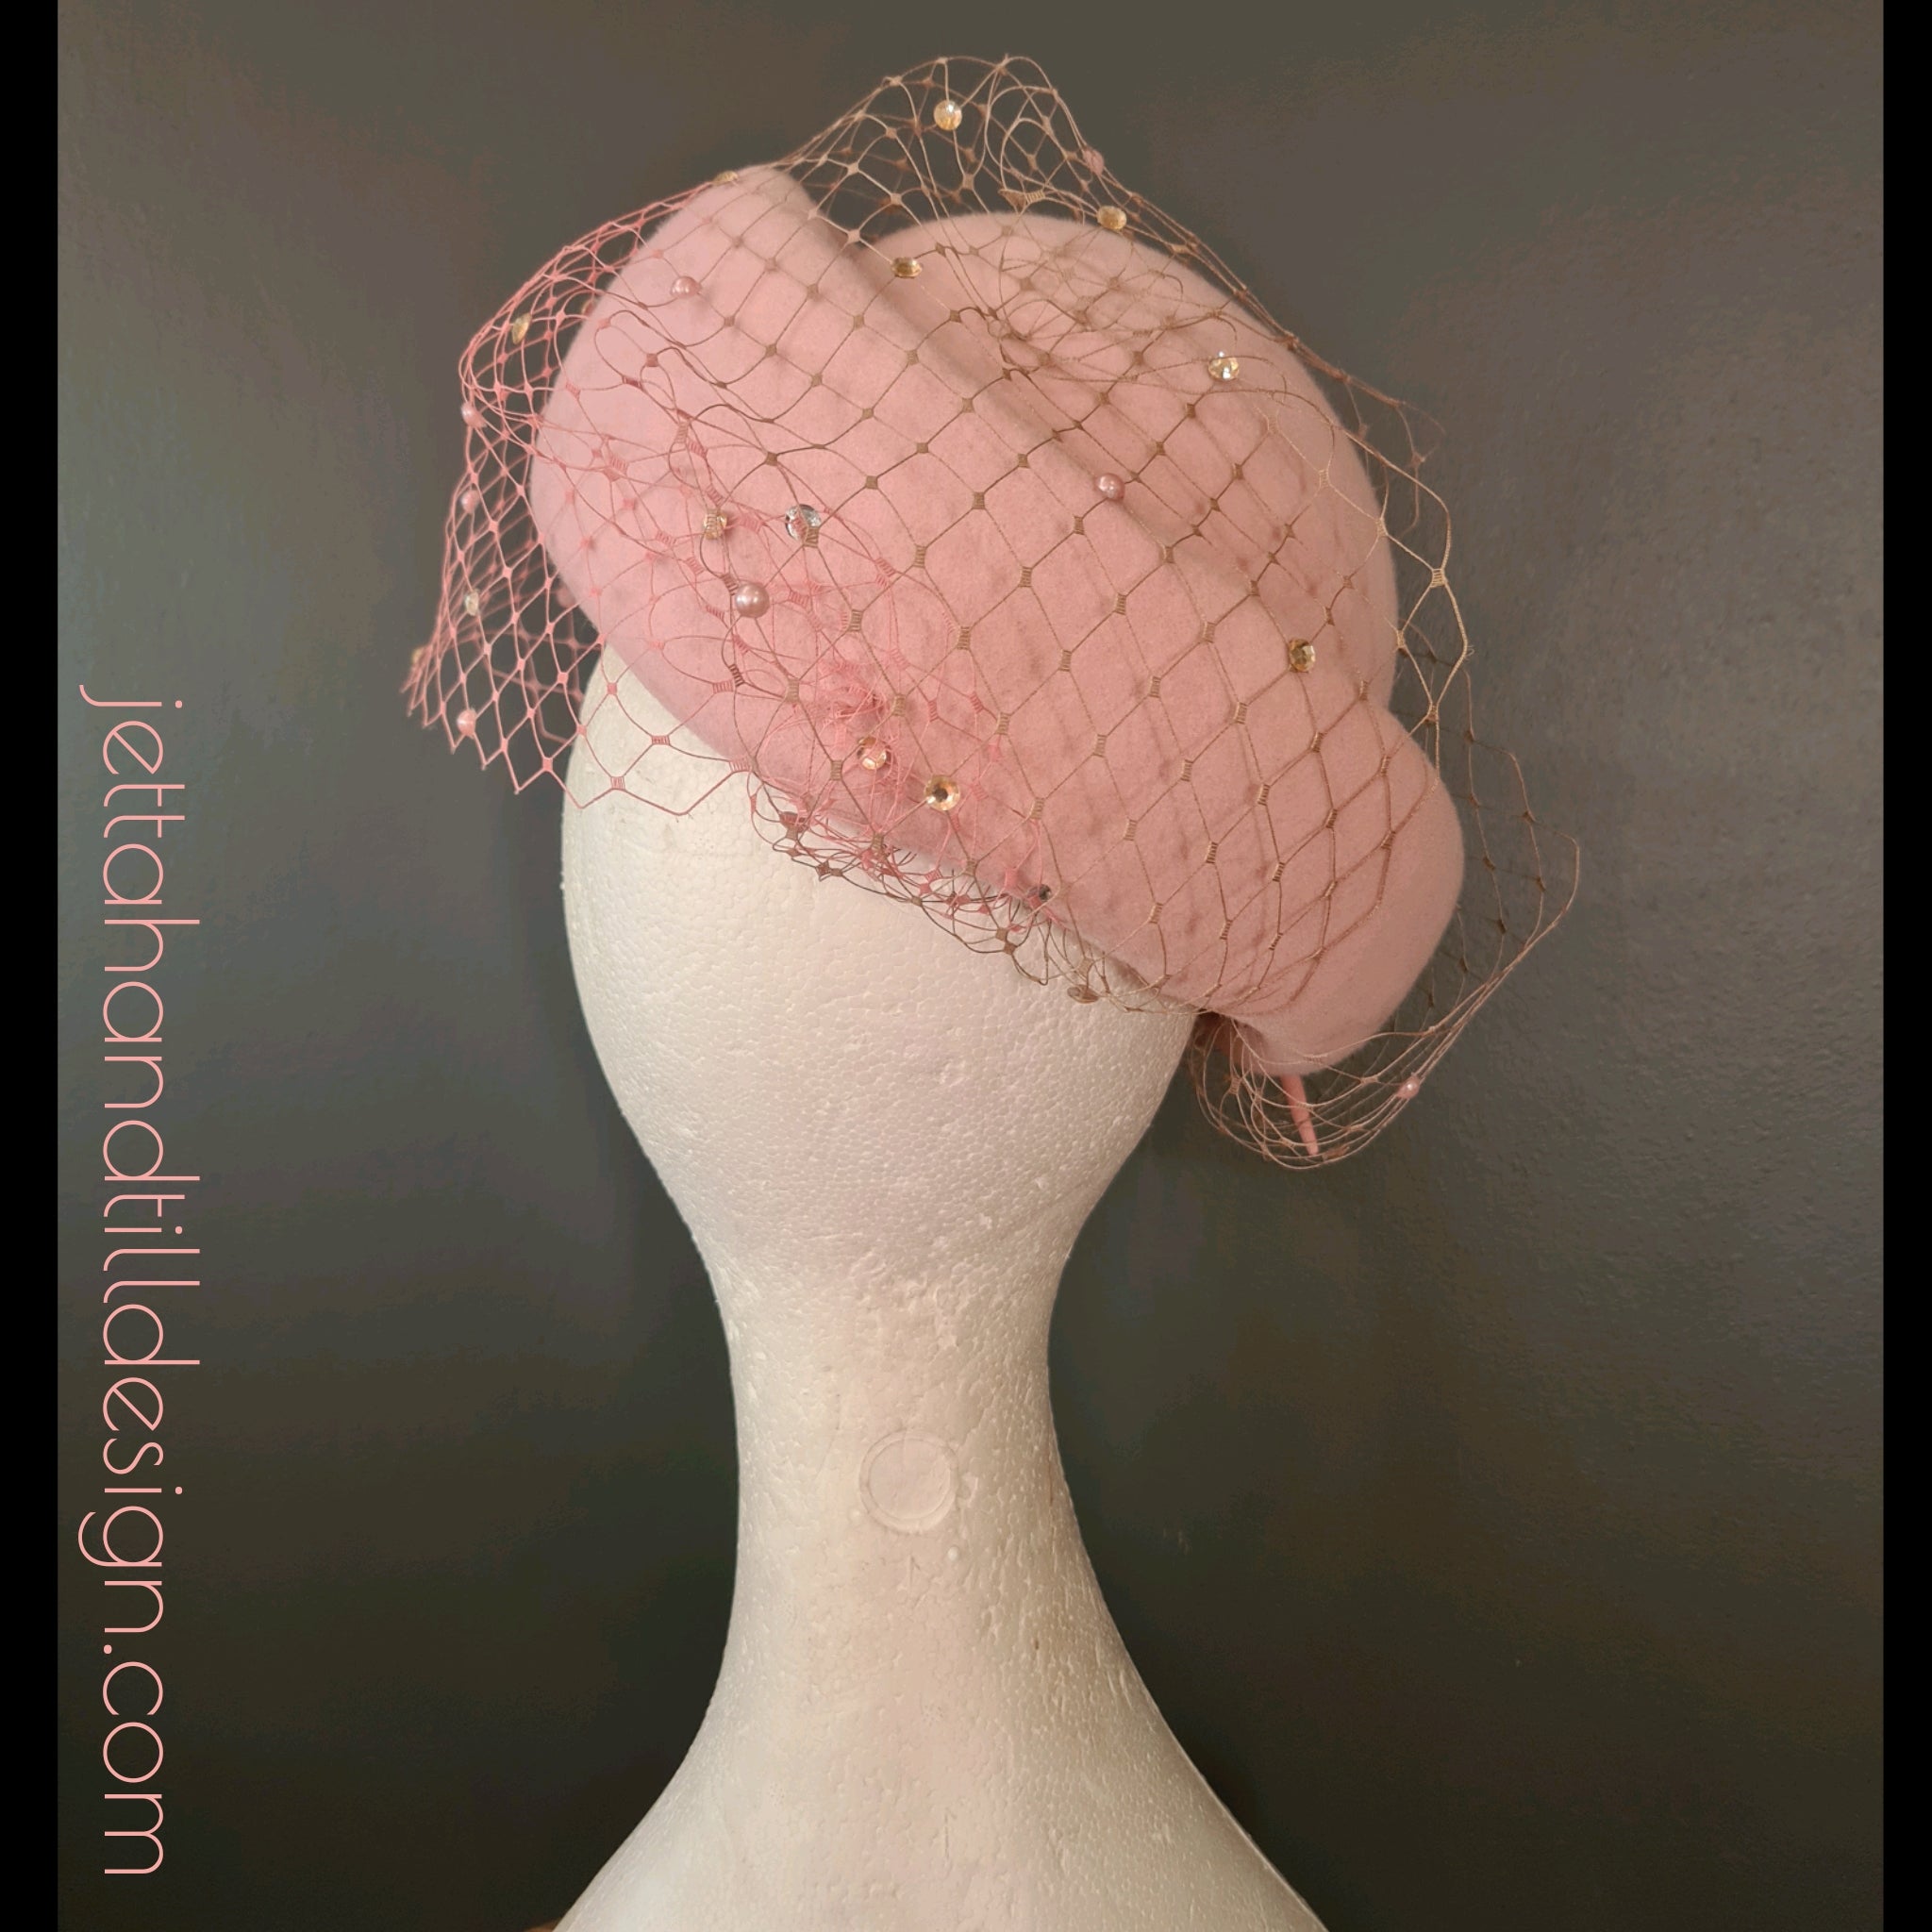 Powder pink felt vintage style piec with ombre veiling